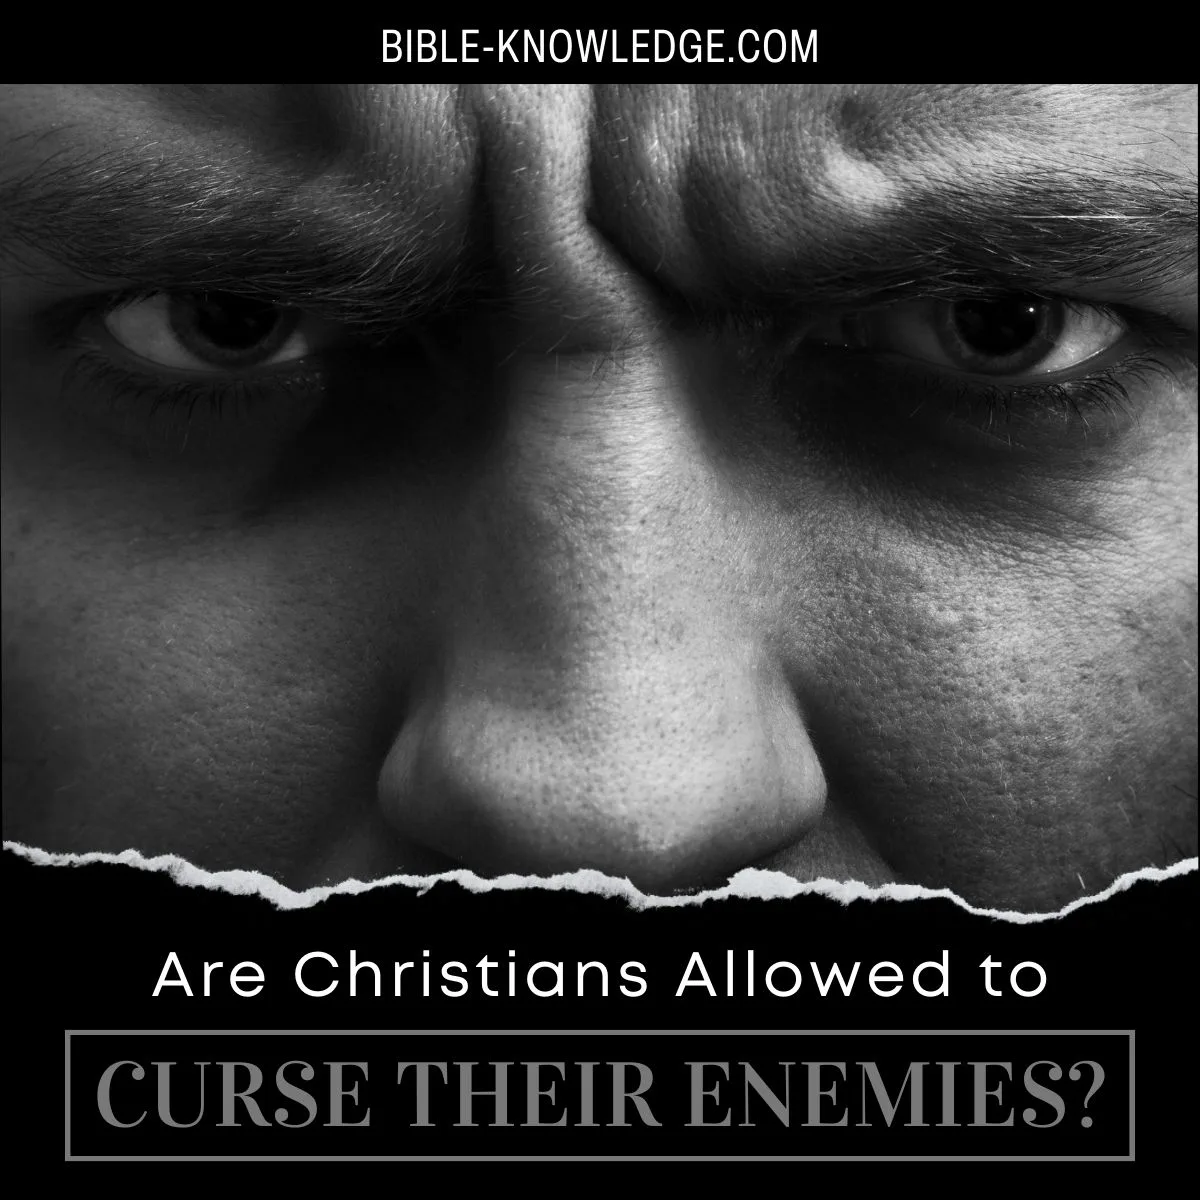 Does God Command That We Curse Our Enemies? - Think Biblically - Biola  University